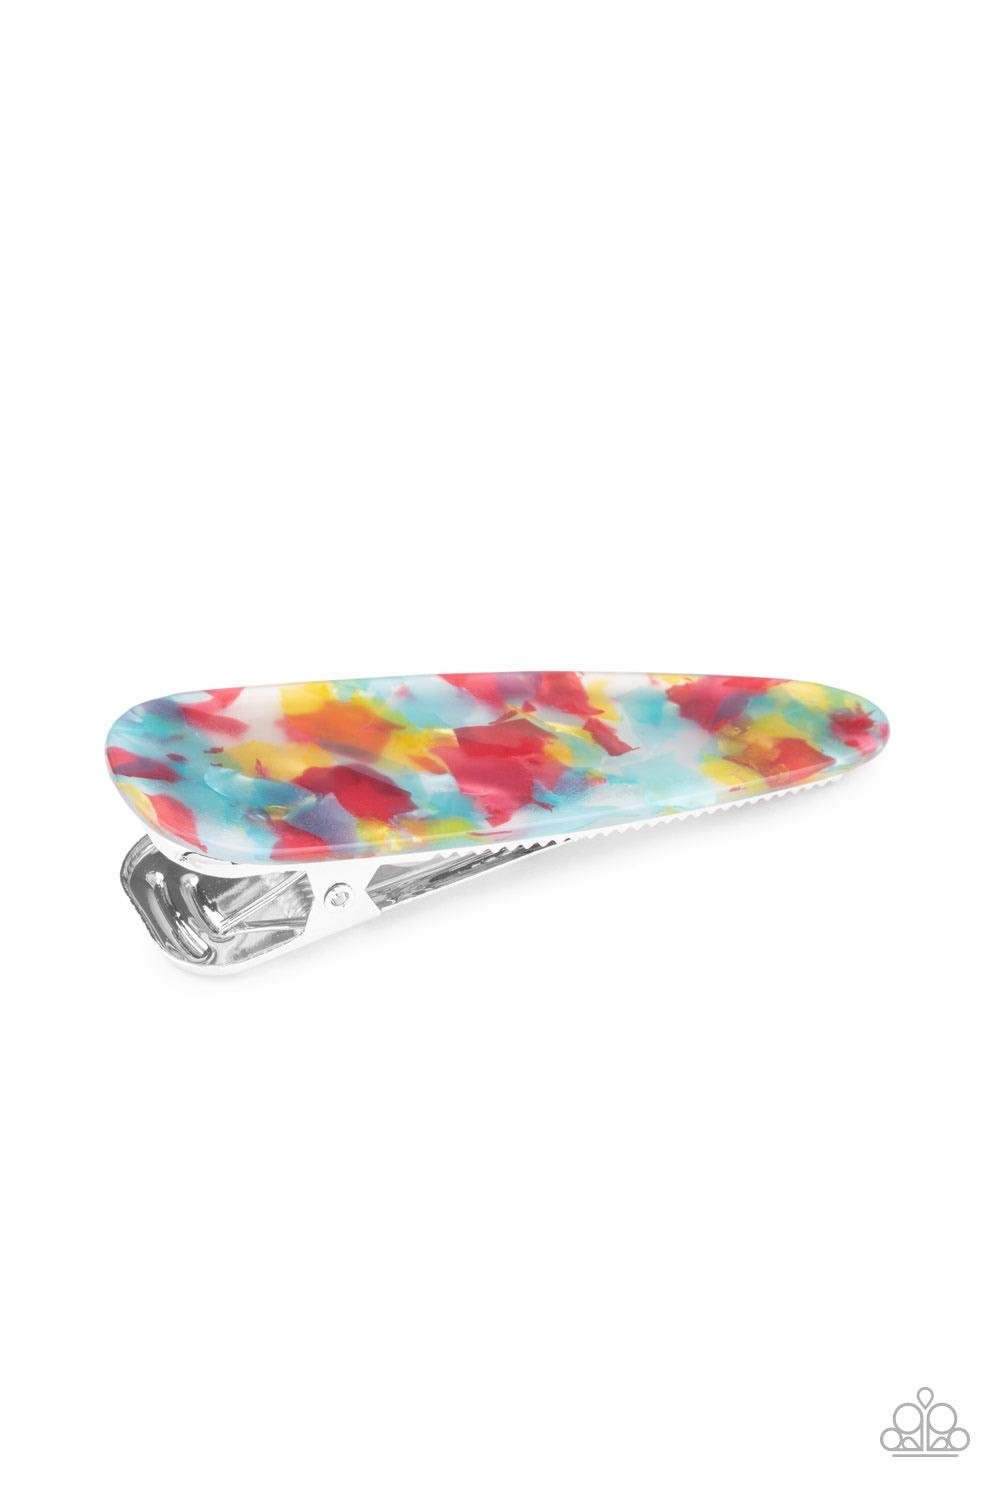 Paparazzi Accessories HAIR I Am! - Multi .Speckled in iridescent accents, a thick acrylic frame clips back the hair for a colorfully retro look. Features a standard hair clip on the back. Color may vary. Sold as one individual hair clip Hair Accessories